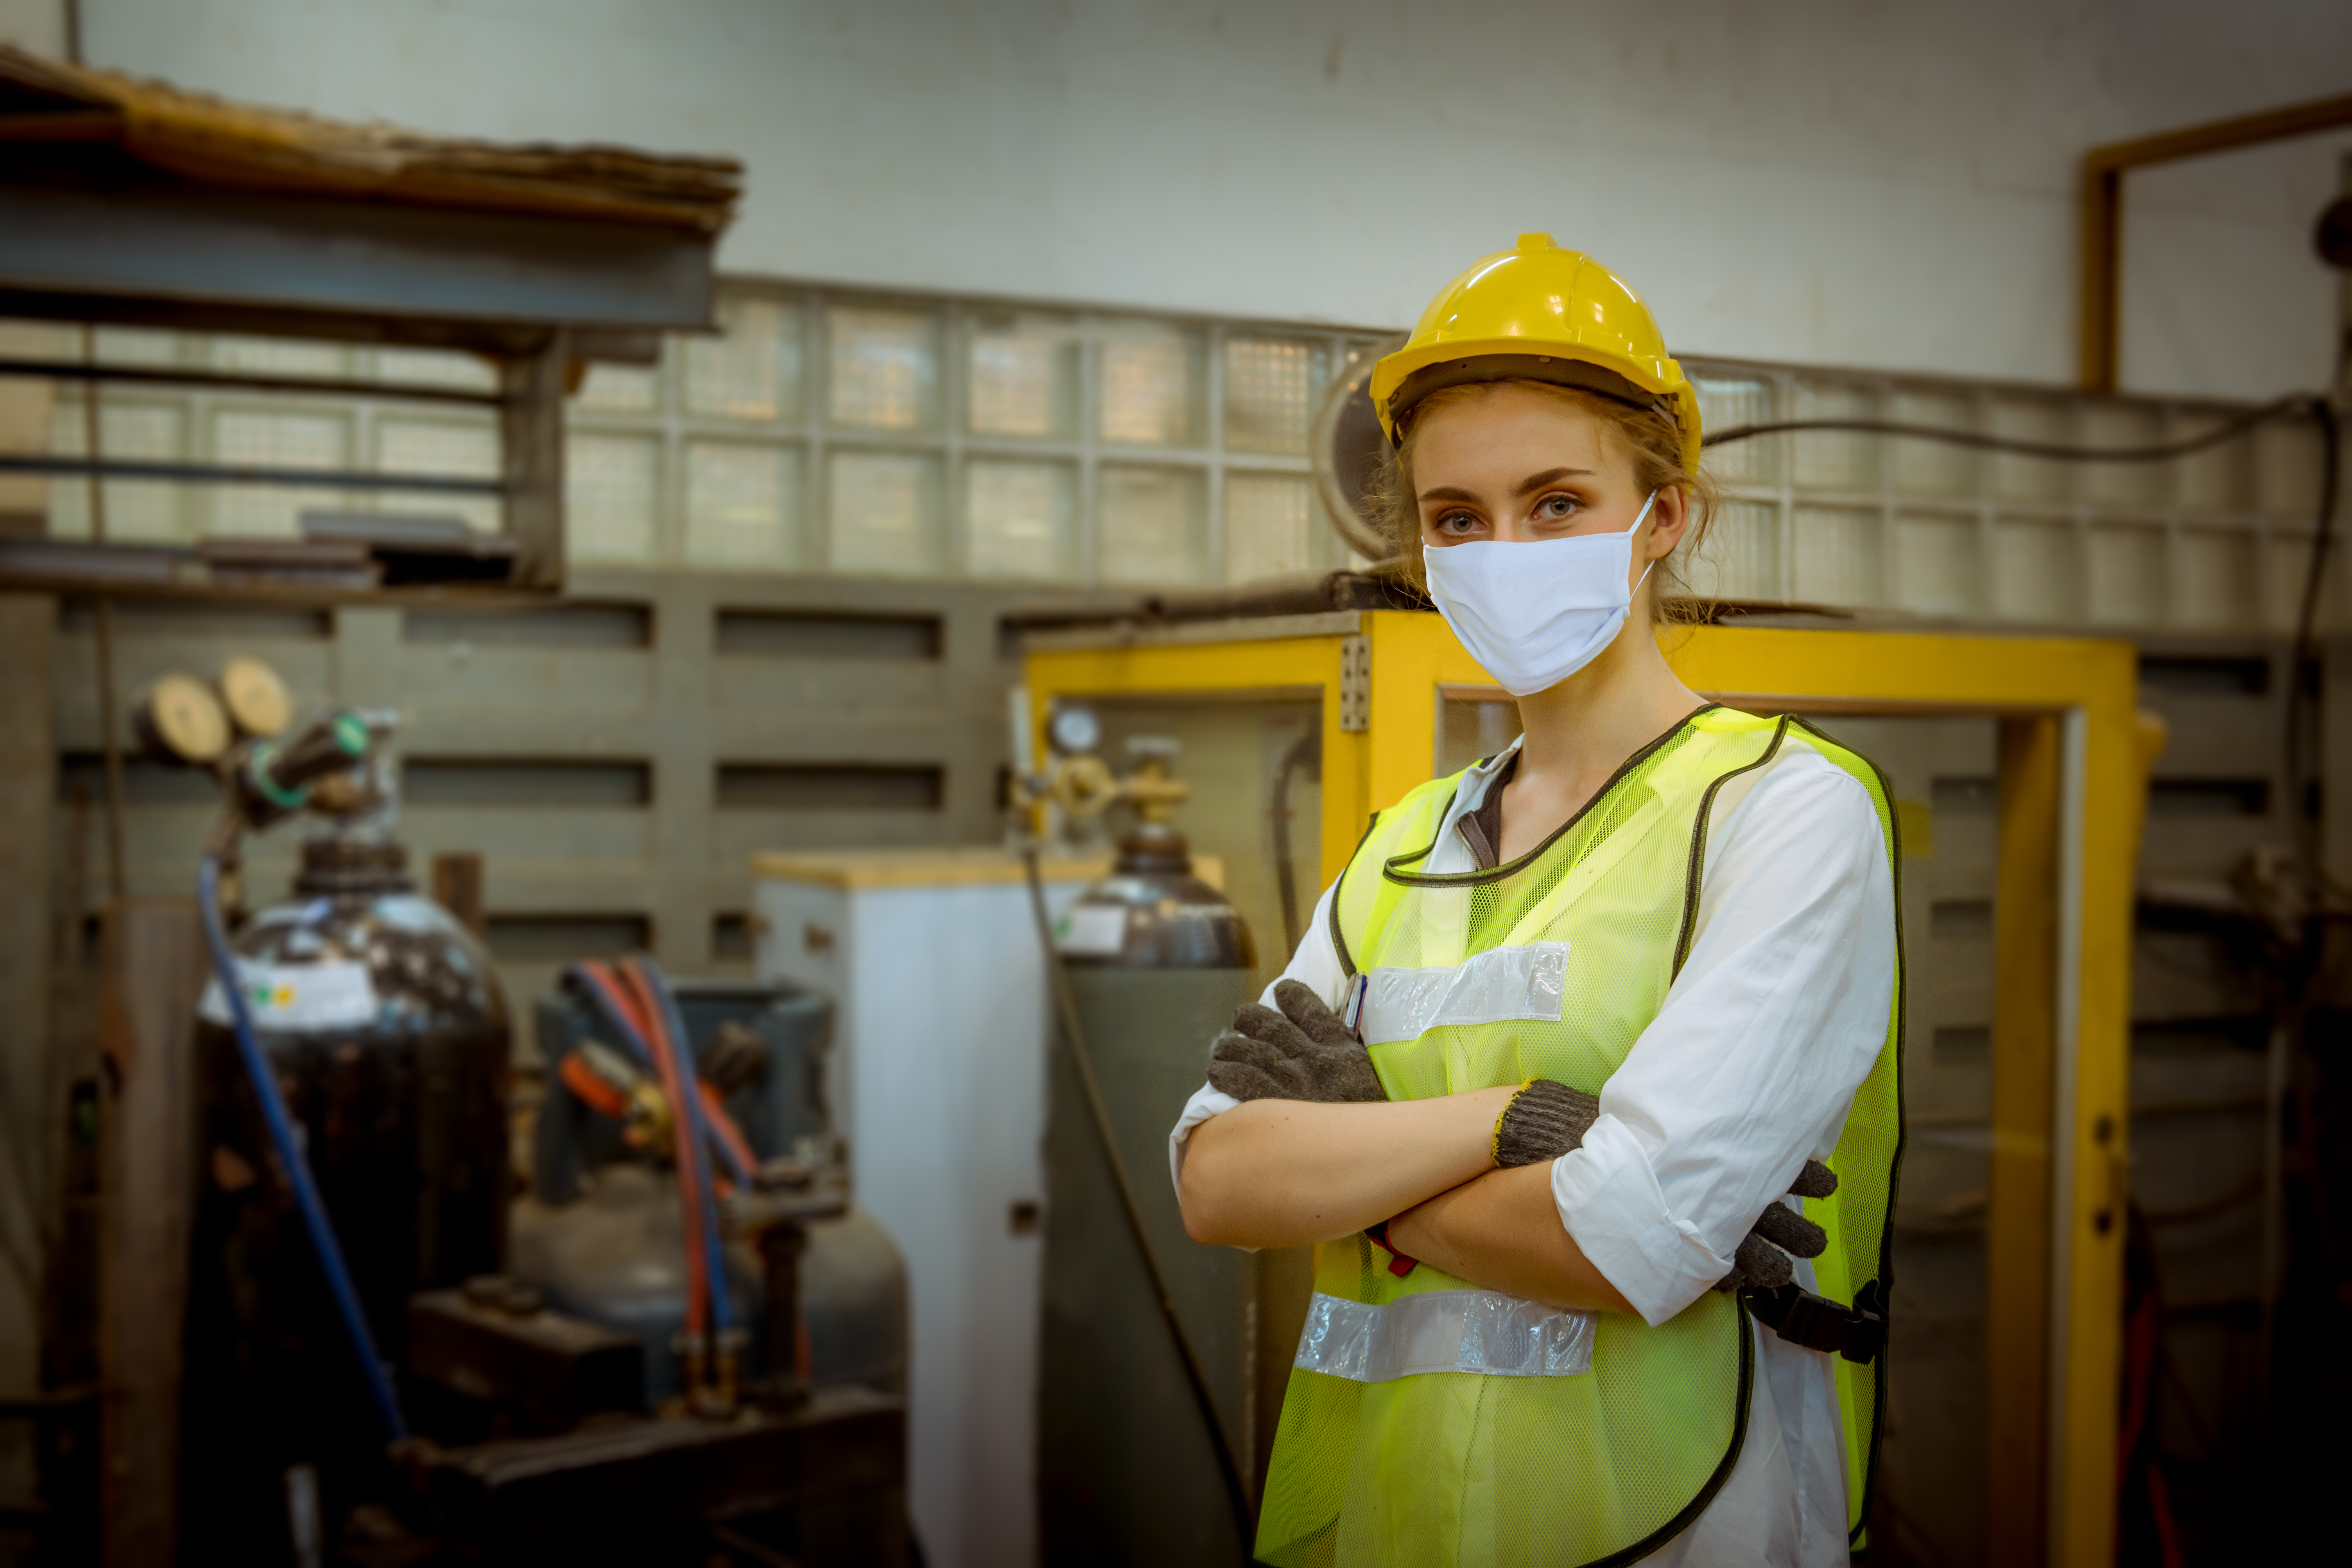 A frontline worker stands with arms crossed wearing a yellow safety helmet, a medical mask, and a yellow safety vest. 